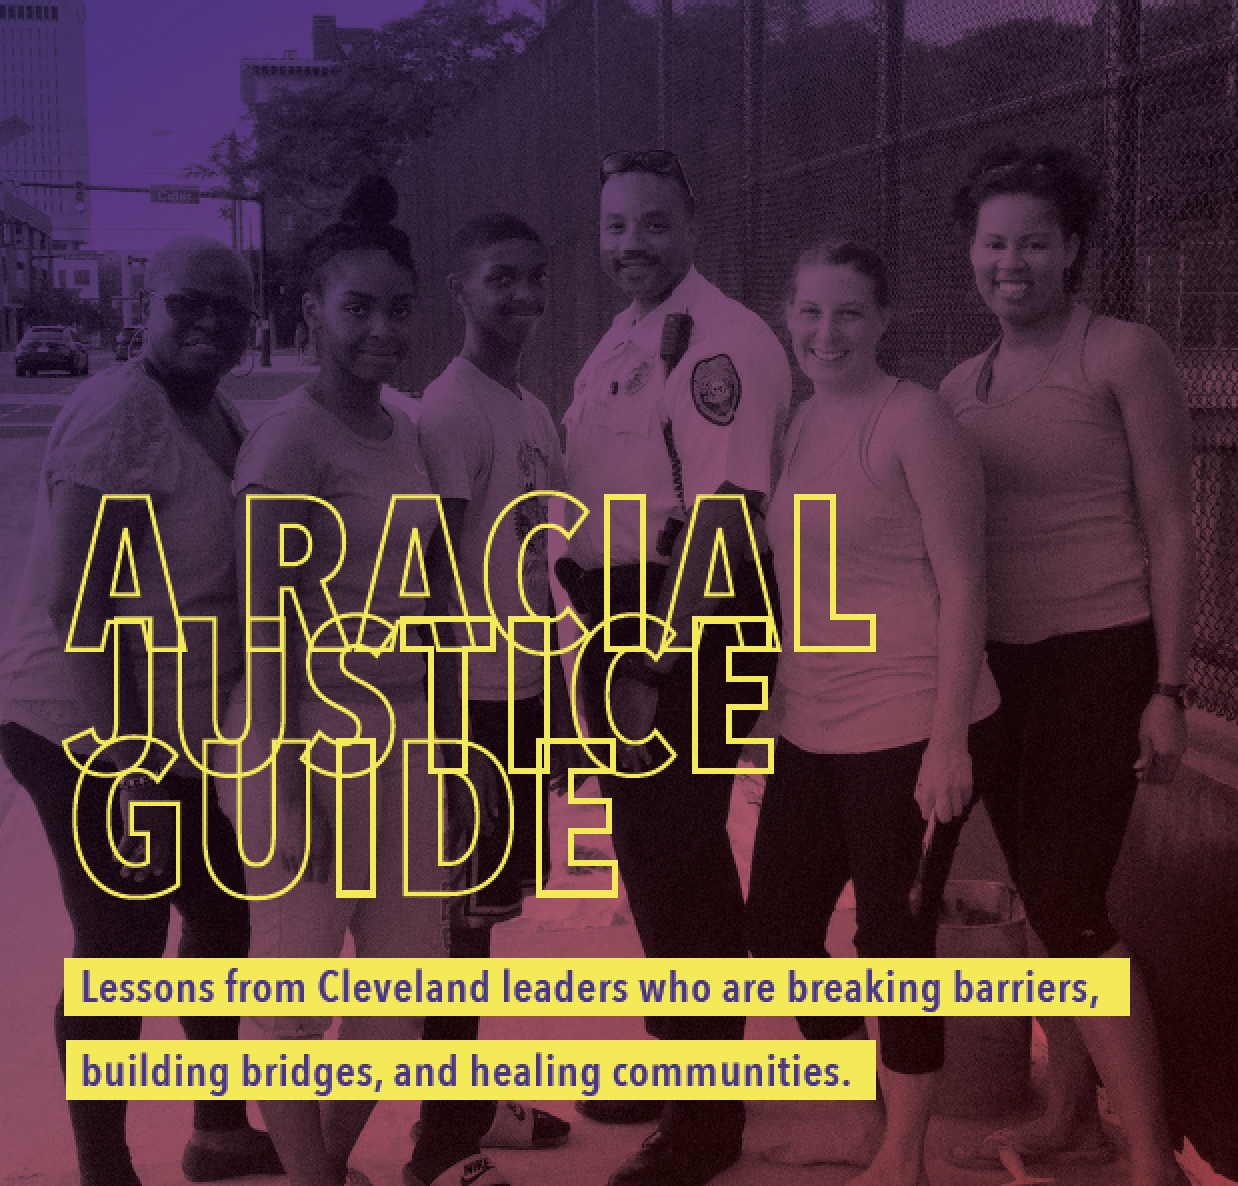 A Racial Justice Guide